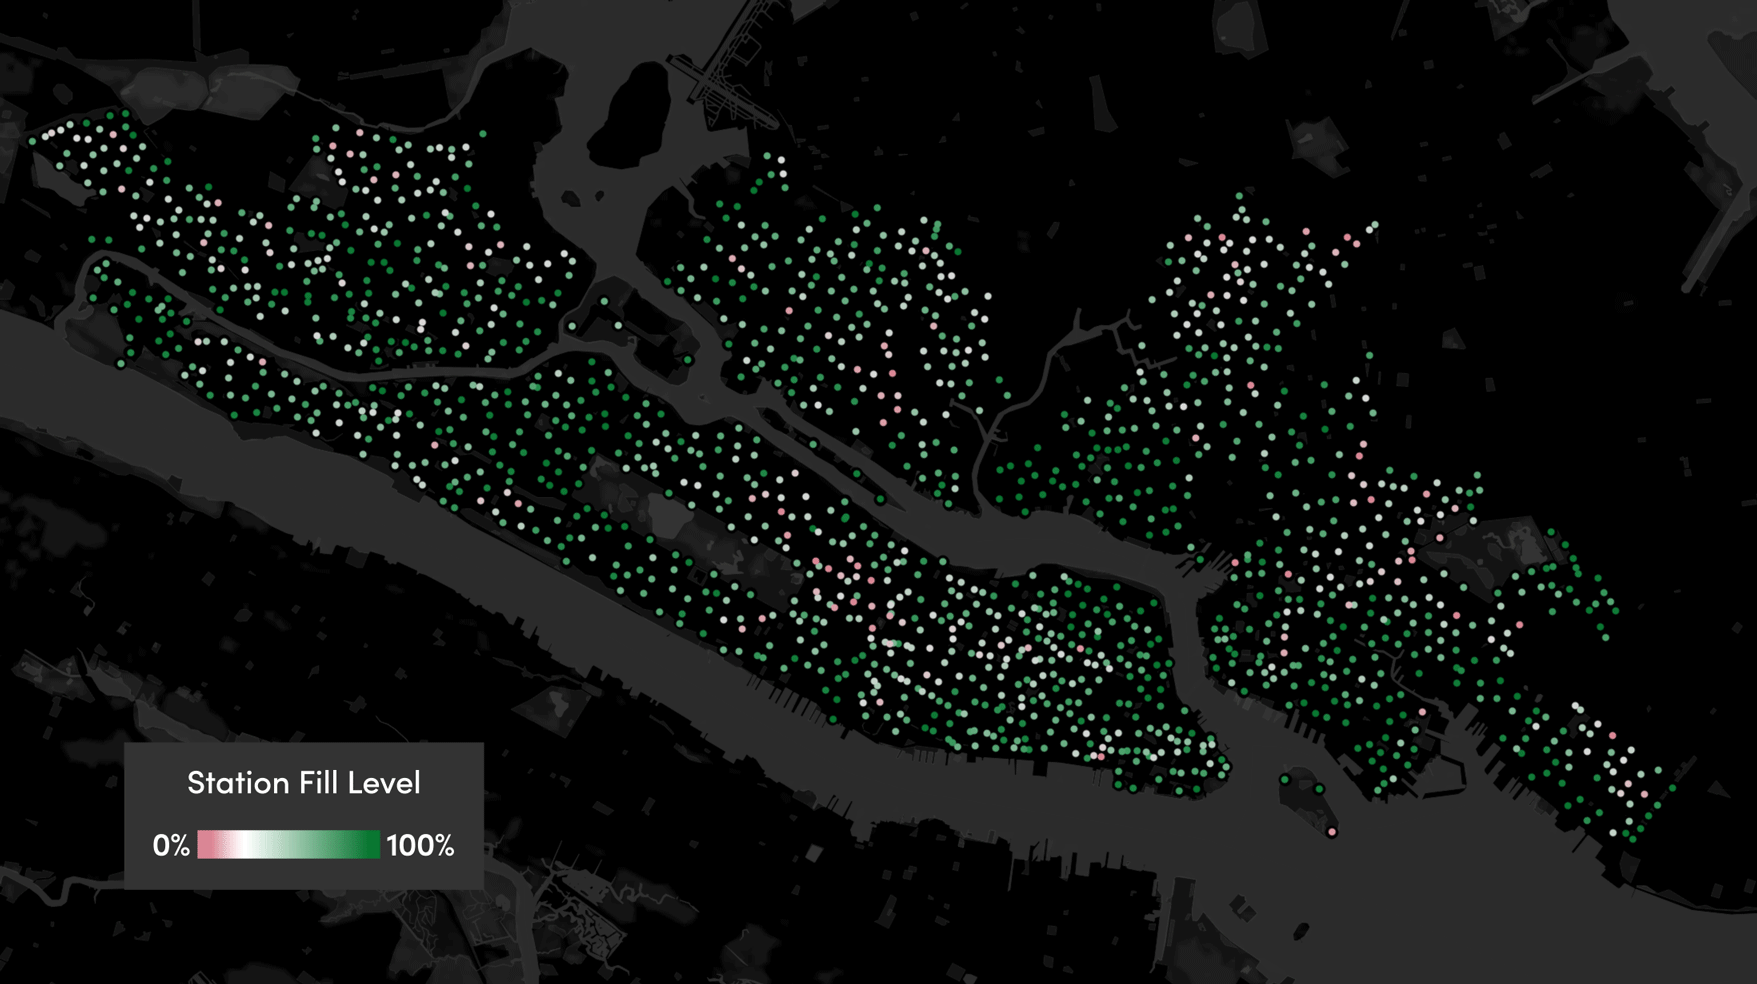 Animated image of Citi Bike station availability in New York City, represented by multicolored dots on a dark background showing the contours of Manhattan, Brooklyn, Queens, and the Bronx.